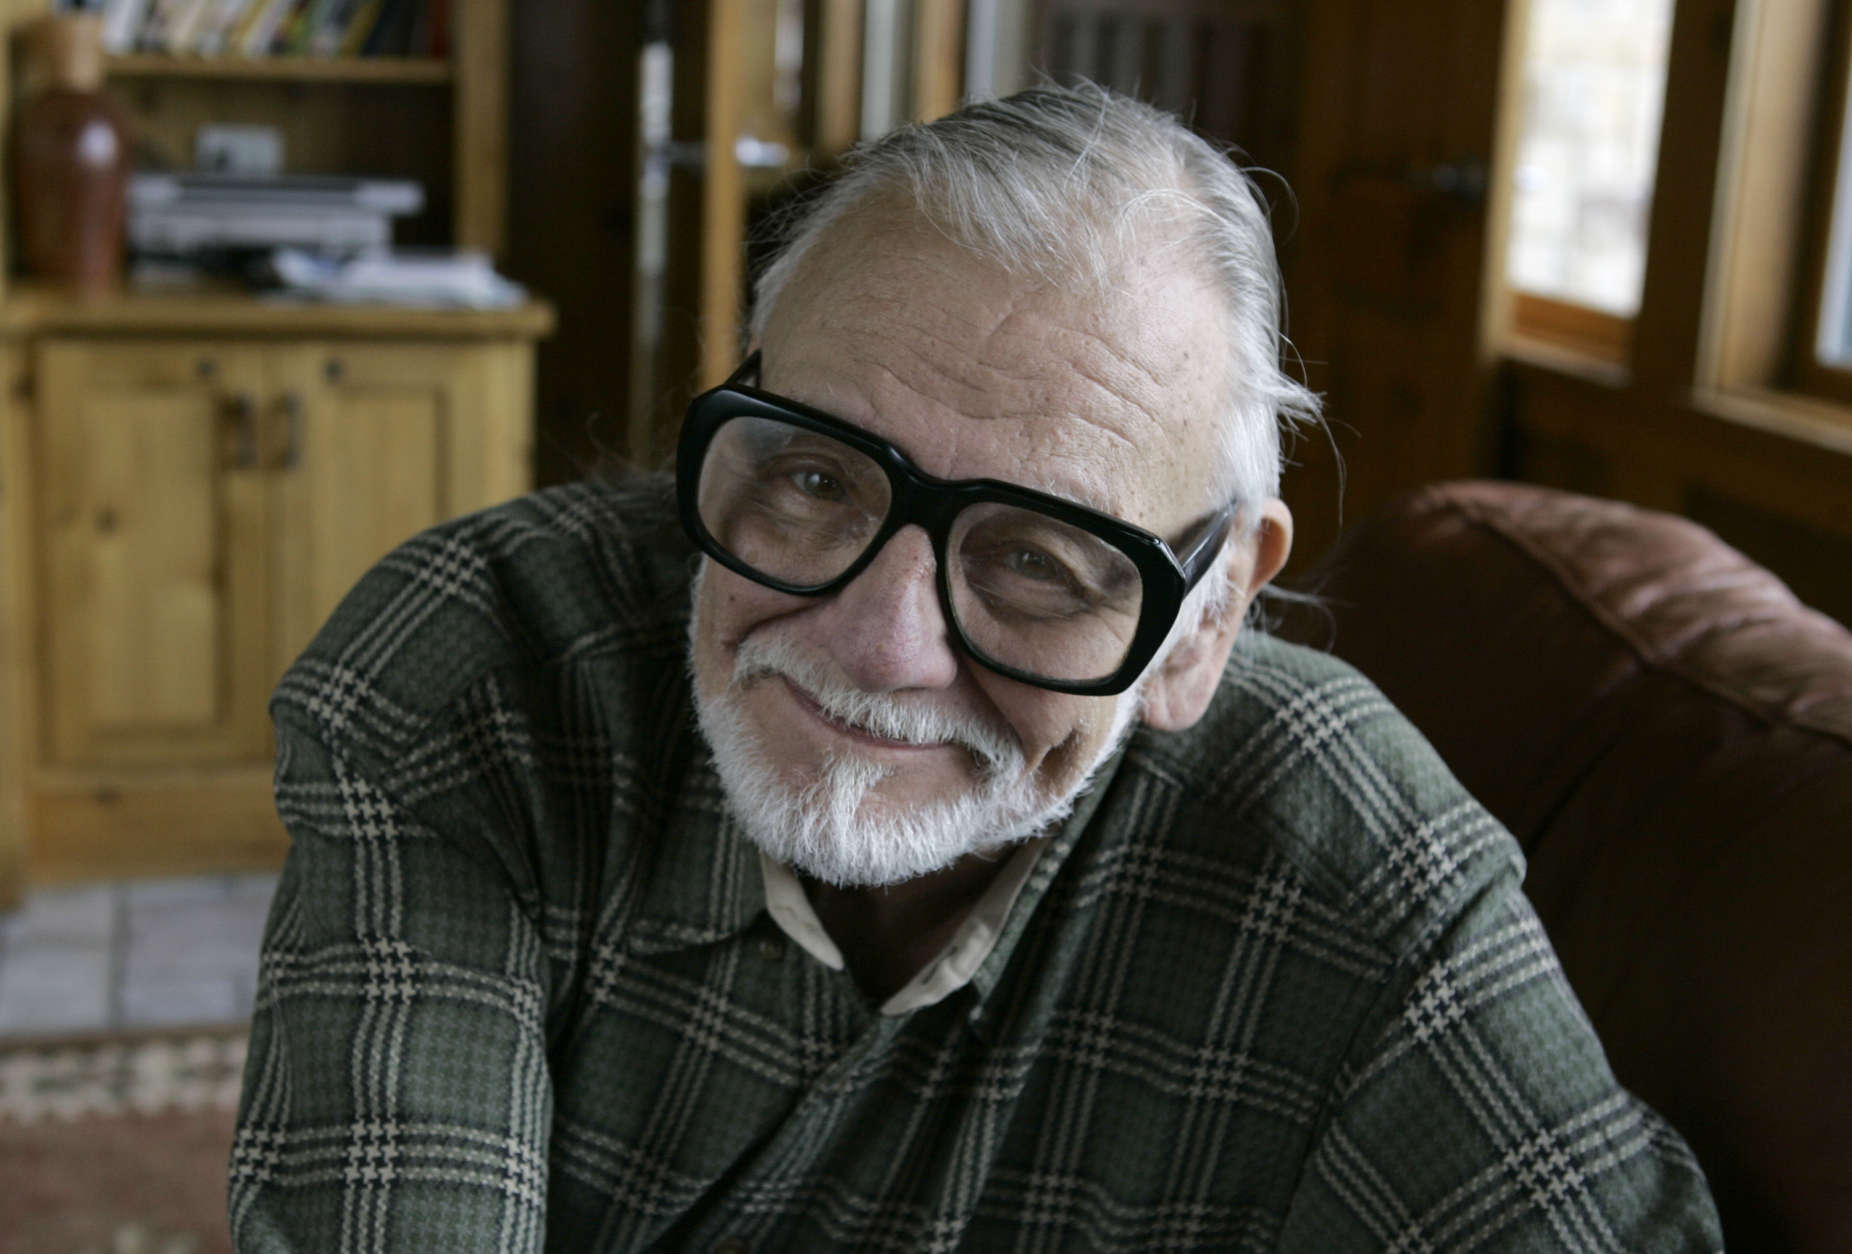 Director and writer George Romero poses for a photograph while talking about his film "Diary of the Dead' at the Sundance Film Festival in Park City, Utah, on Monday, Jan. 21, 2008.  Romero shot the first of his five zombie films, 'Night of the Living Dead', nearly four decades ago. (AP Photo/Amy Sancetta)